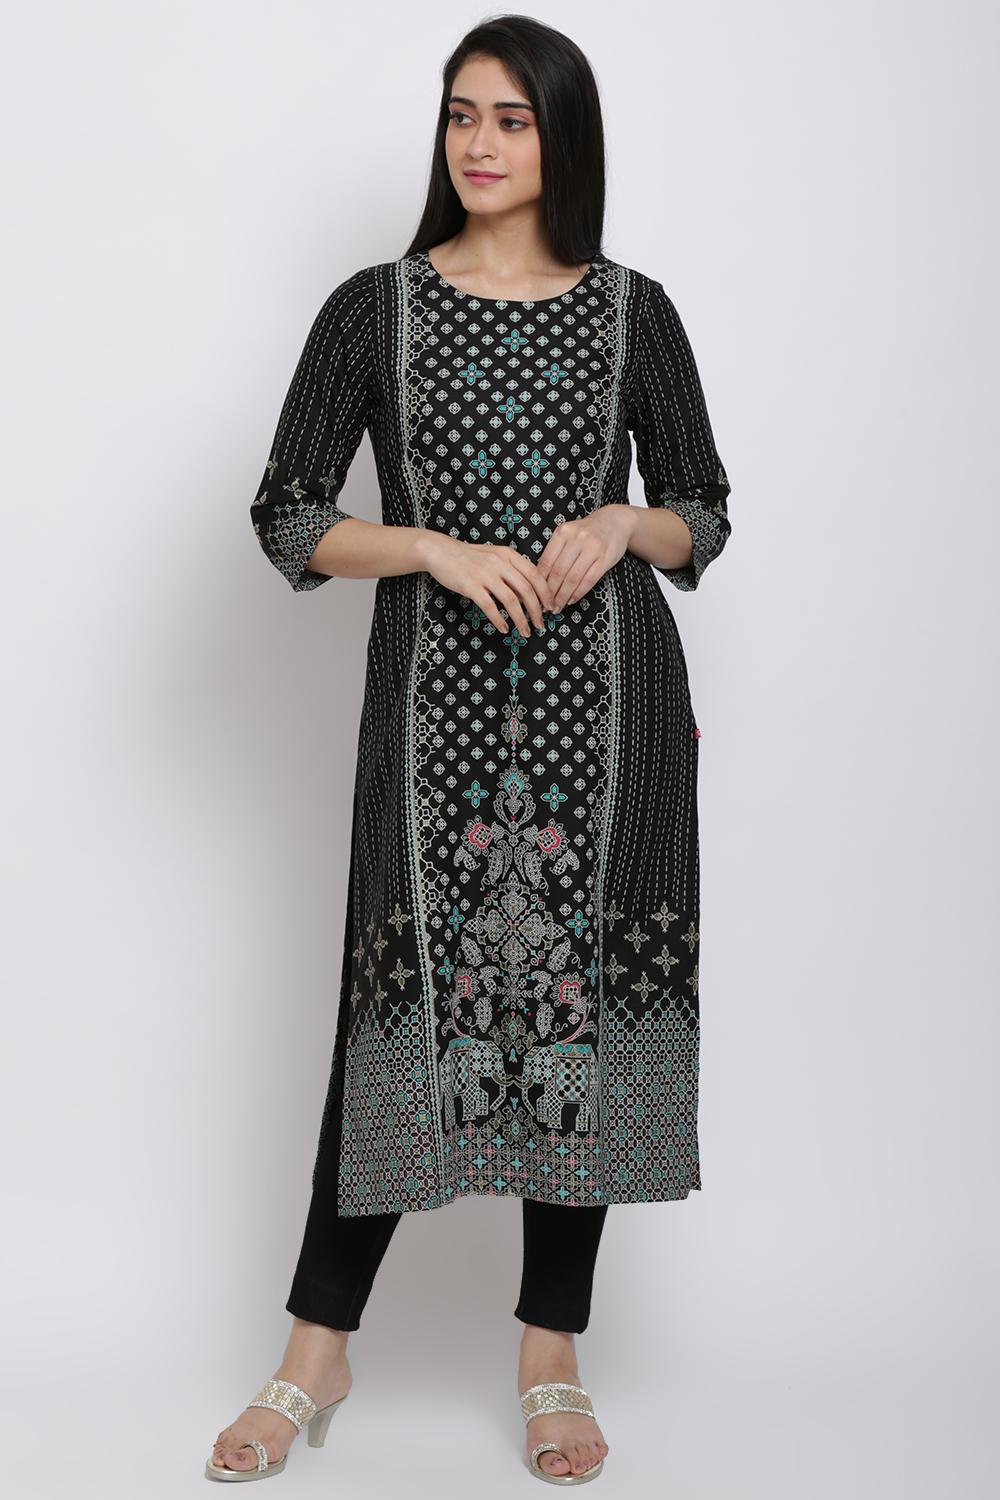 Buy Online Black Cotton Flax Kurti for Women & Girls at Best Prices in ...